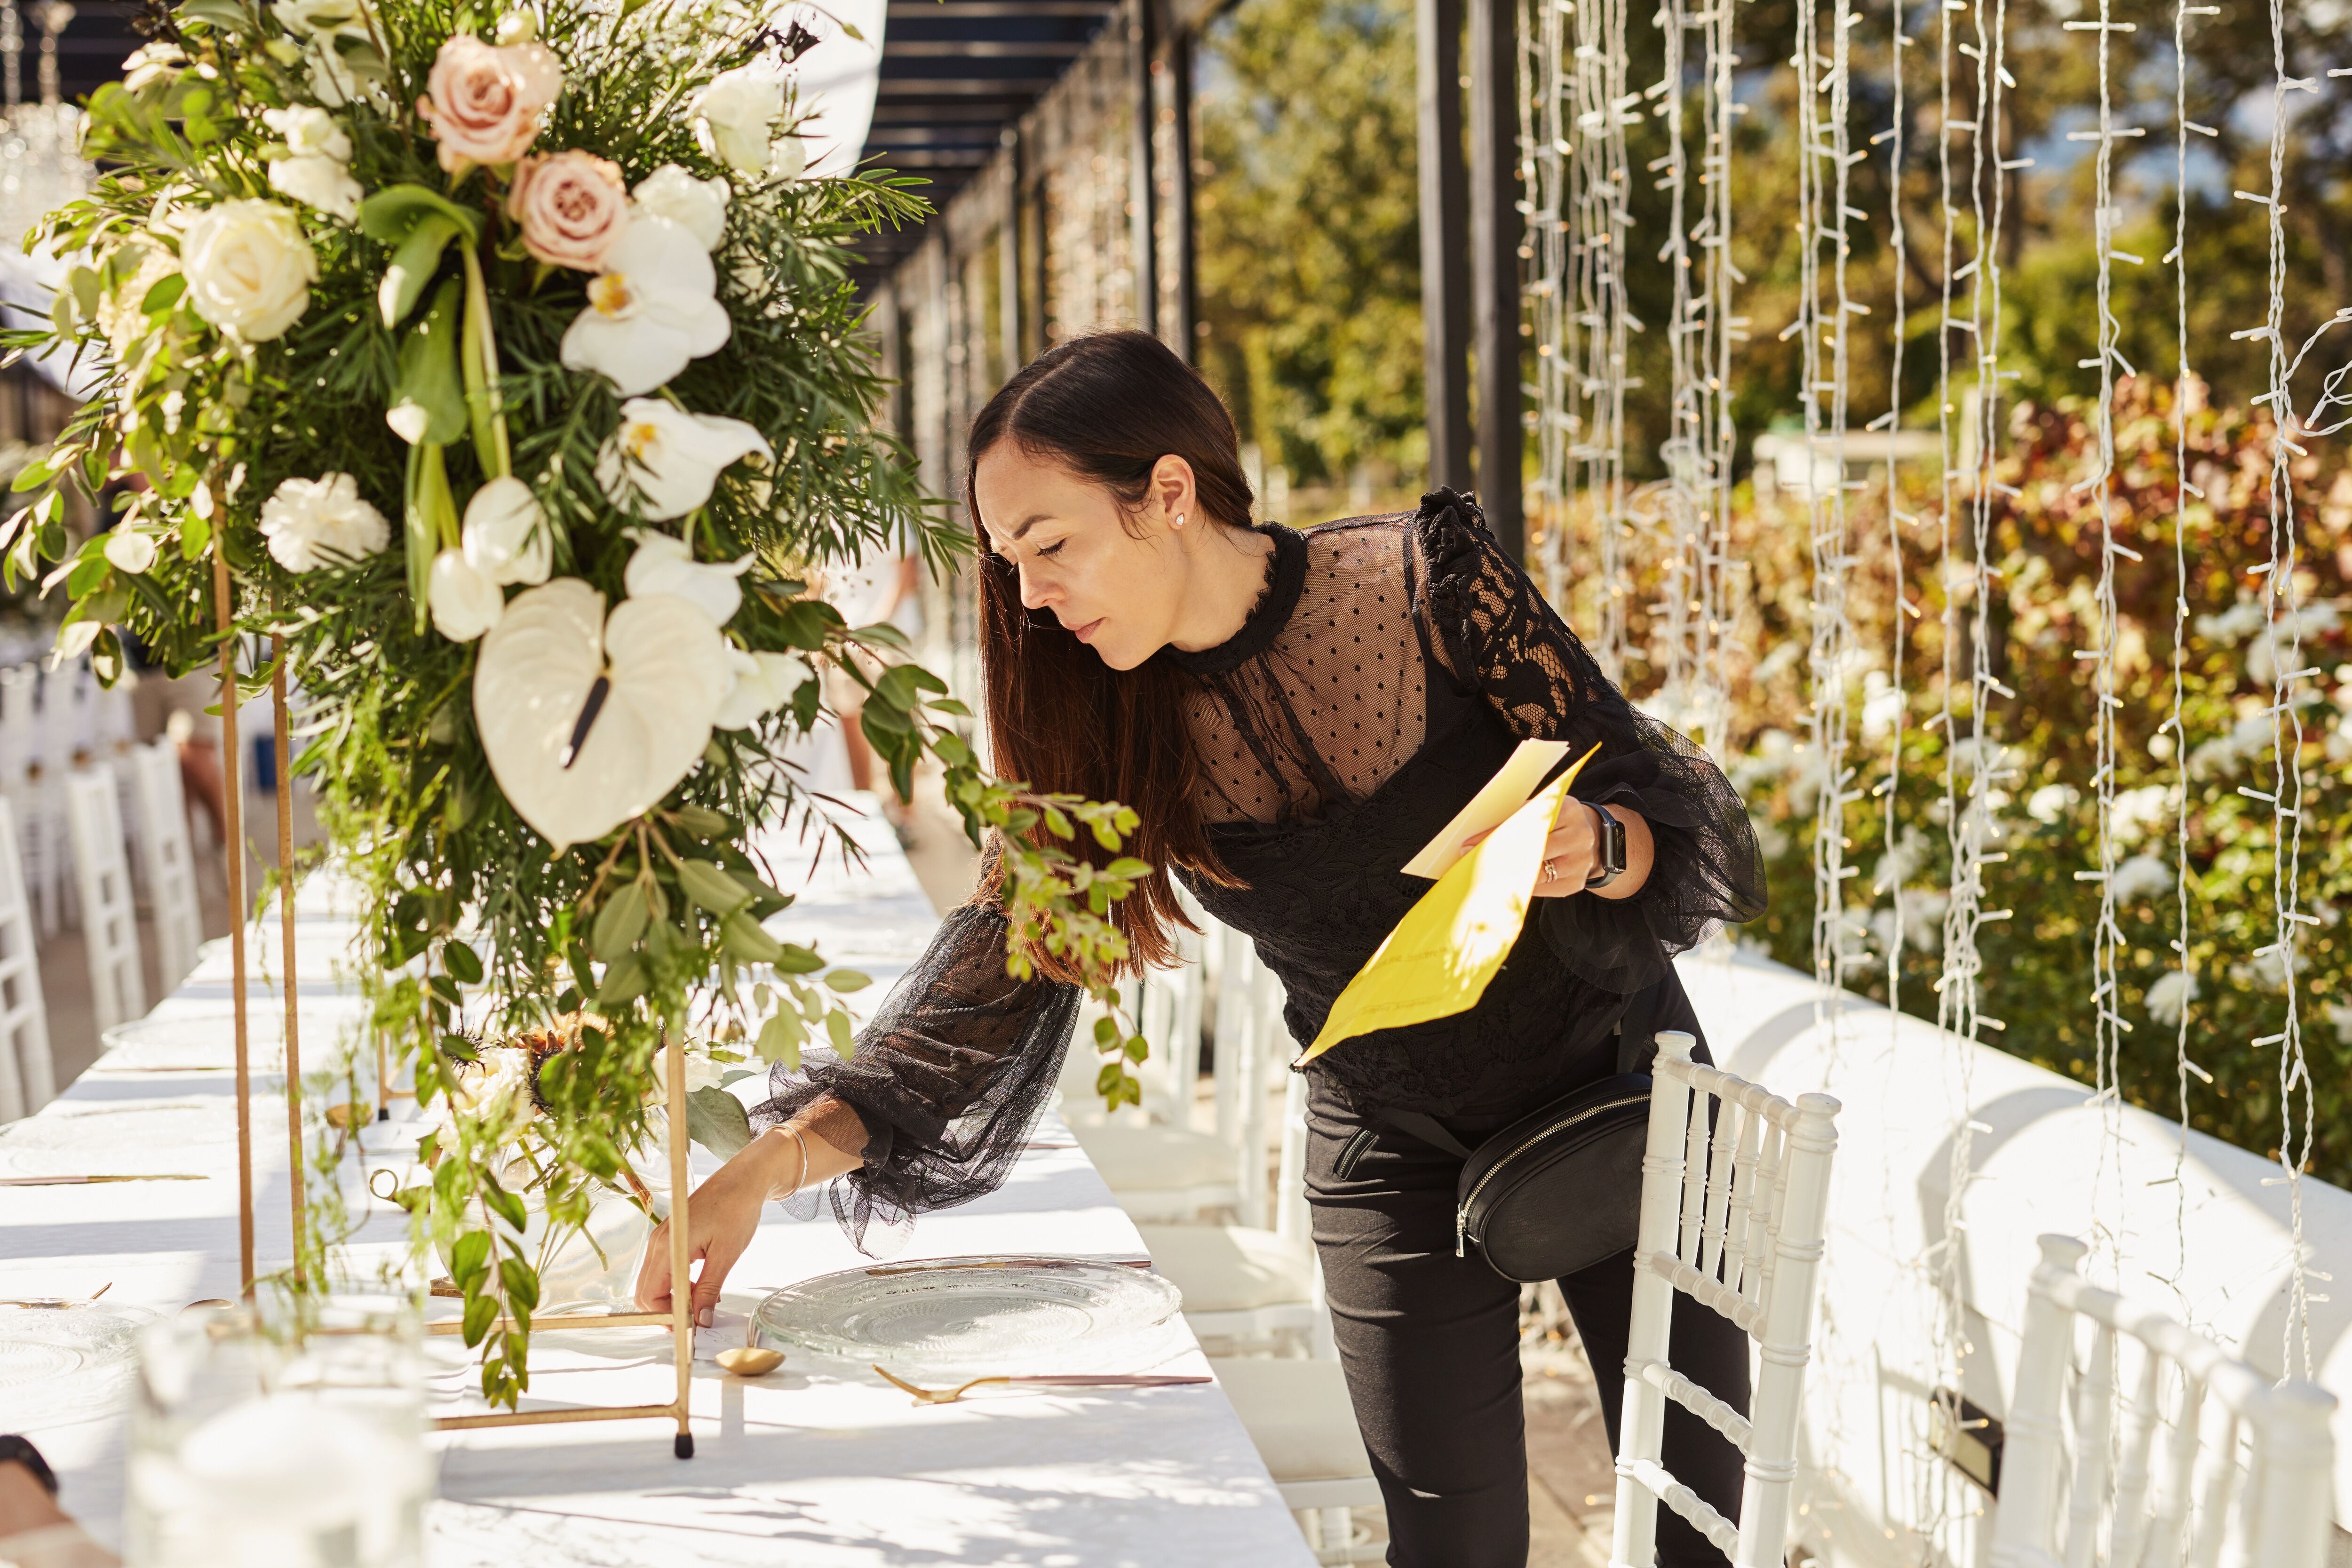 A florist in a black lace blouse is arranging white and pink flowers on a decorated event table, with a focus and attention to detail.